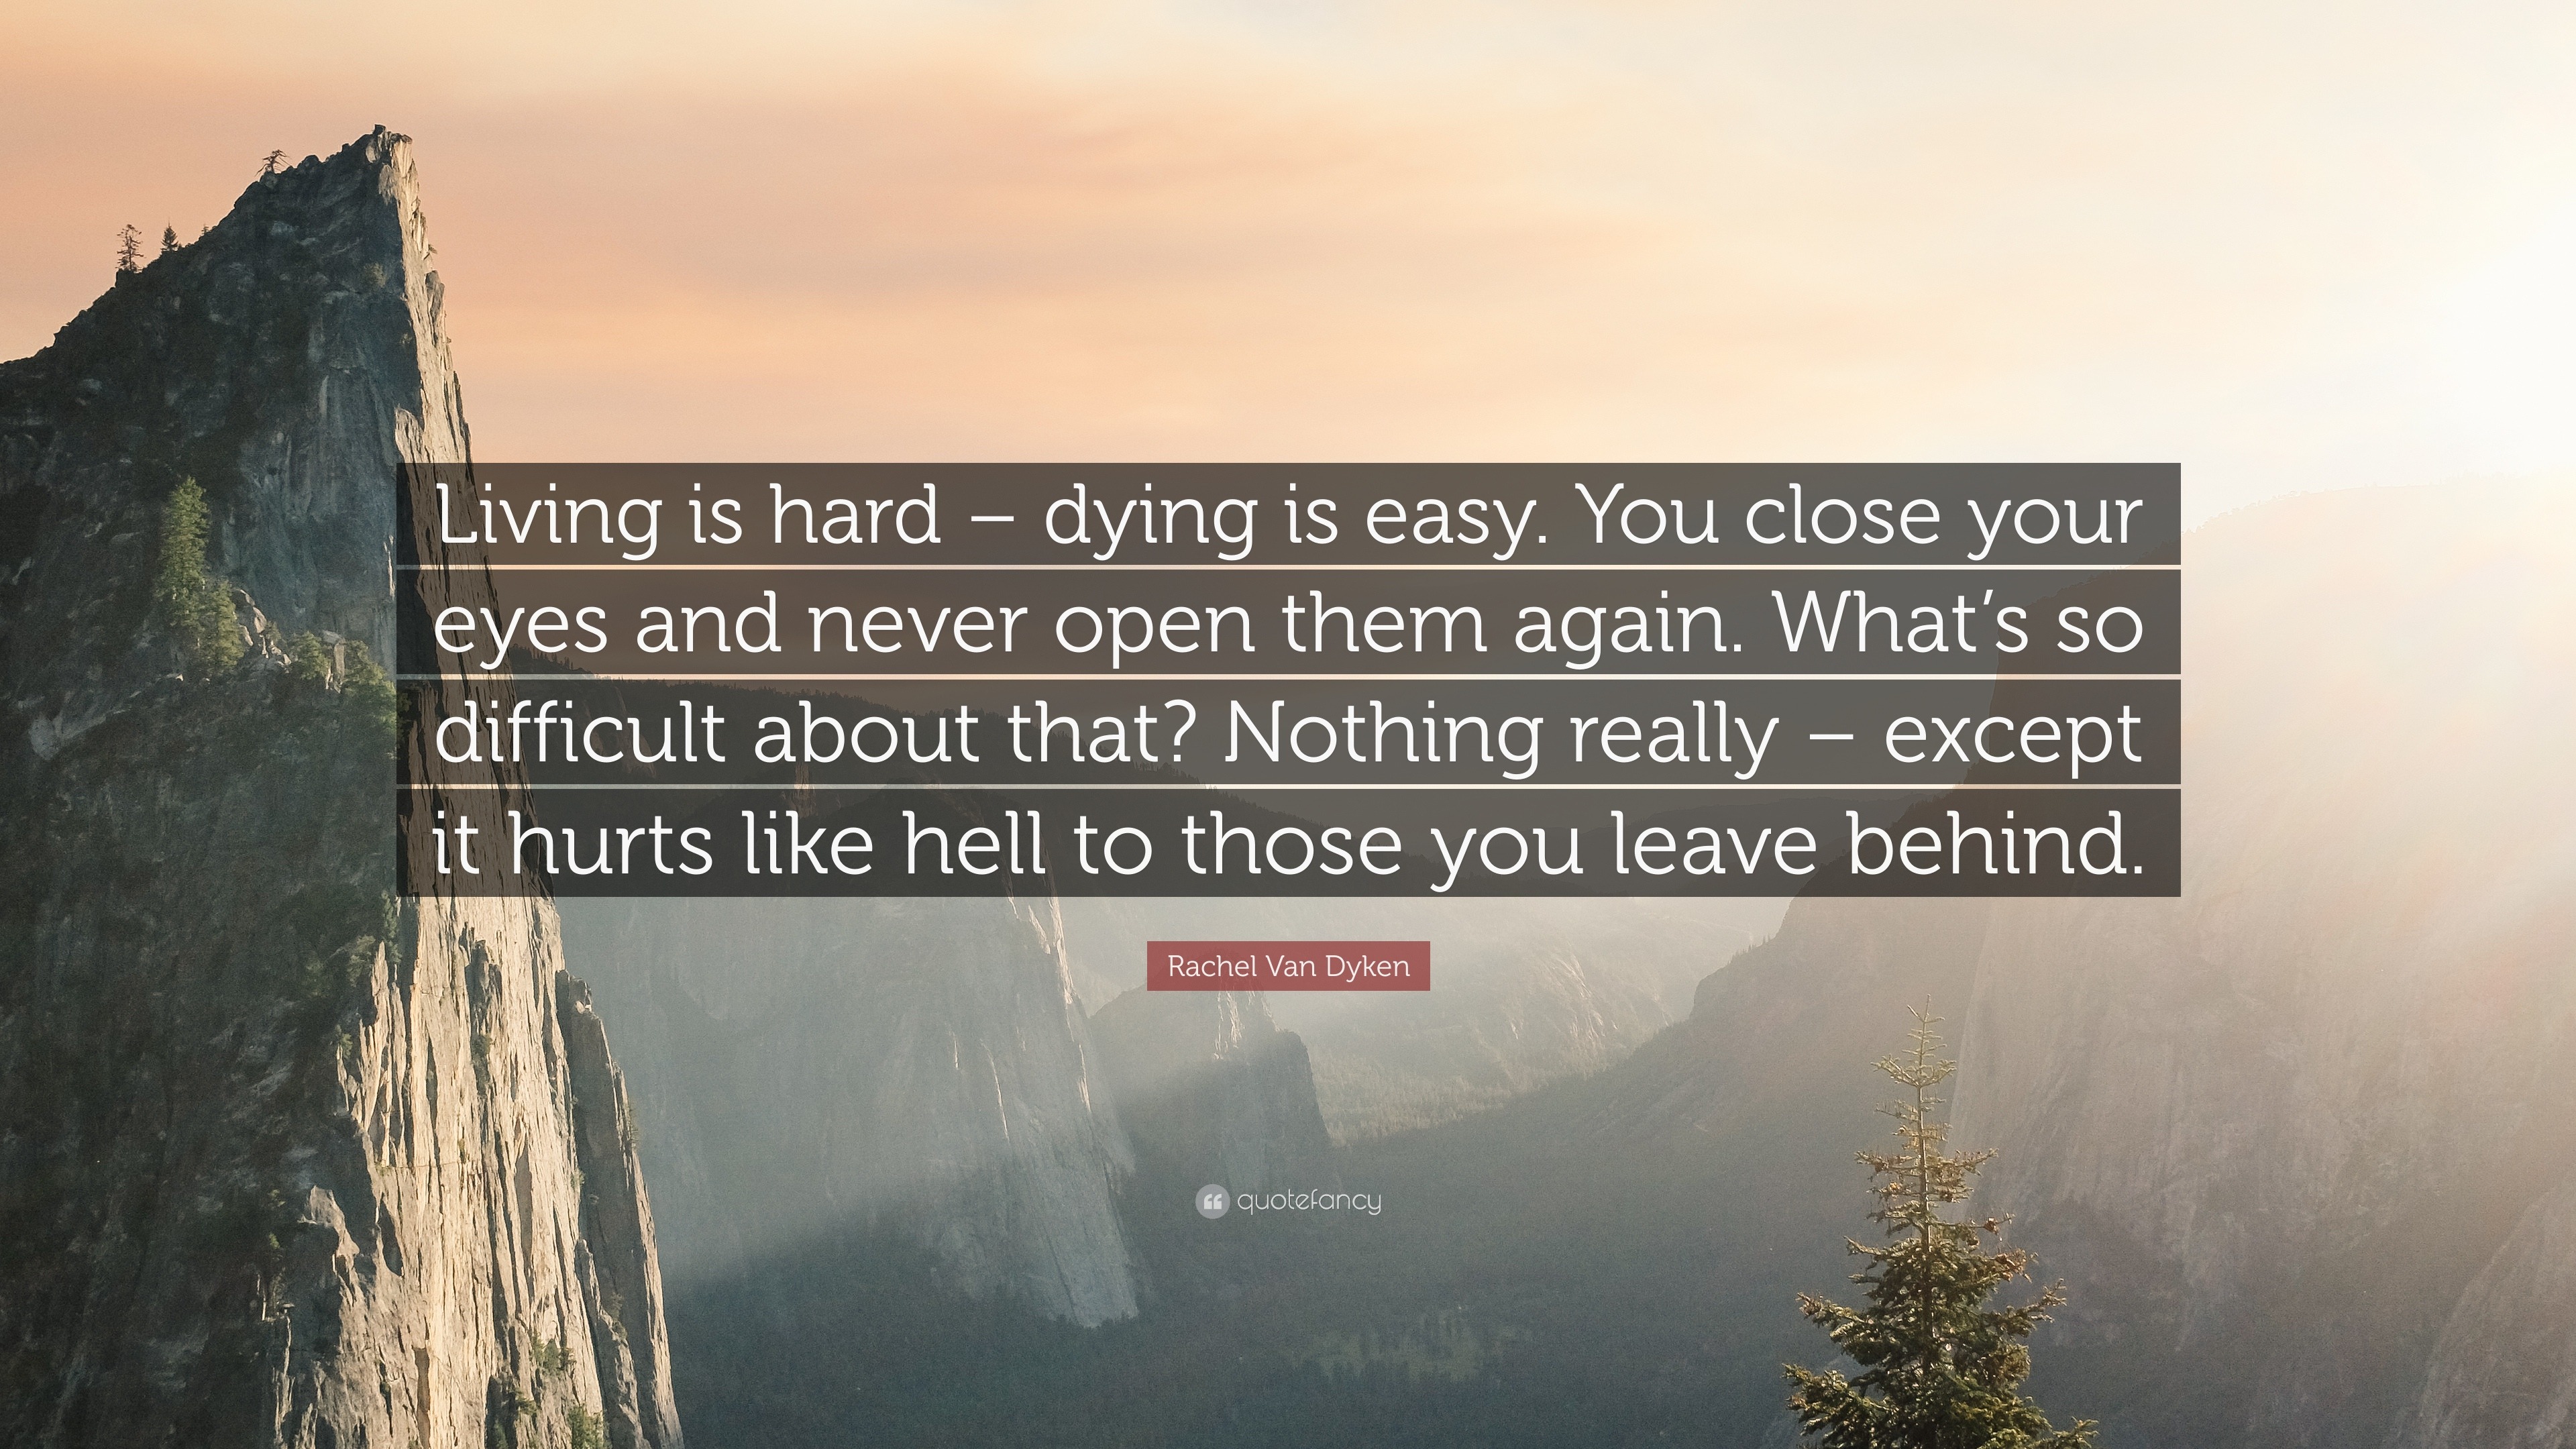 Rachel Van Dyken Quote: “Living Is Hard – Dying Is Easy. You Close Your Eyes And Never Open Them Again. What's So Difficult About That? Nothing R...”